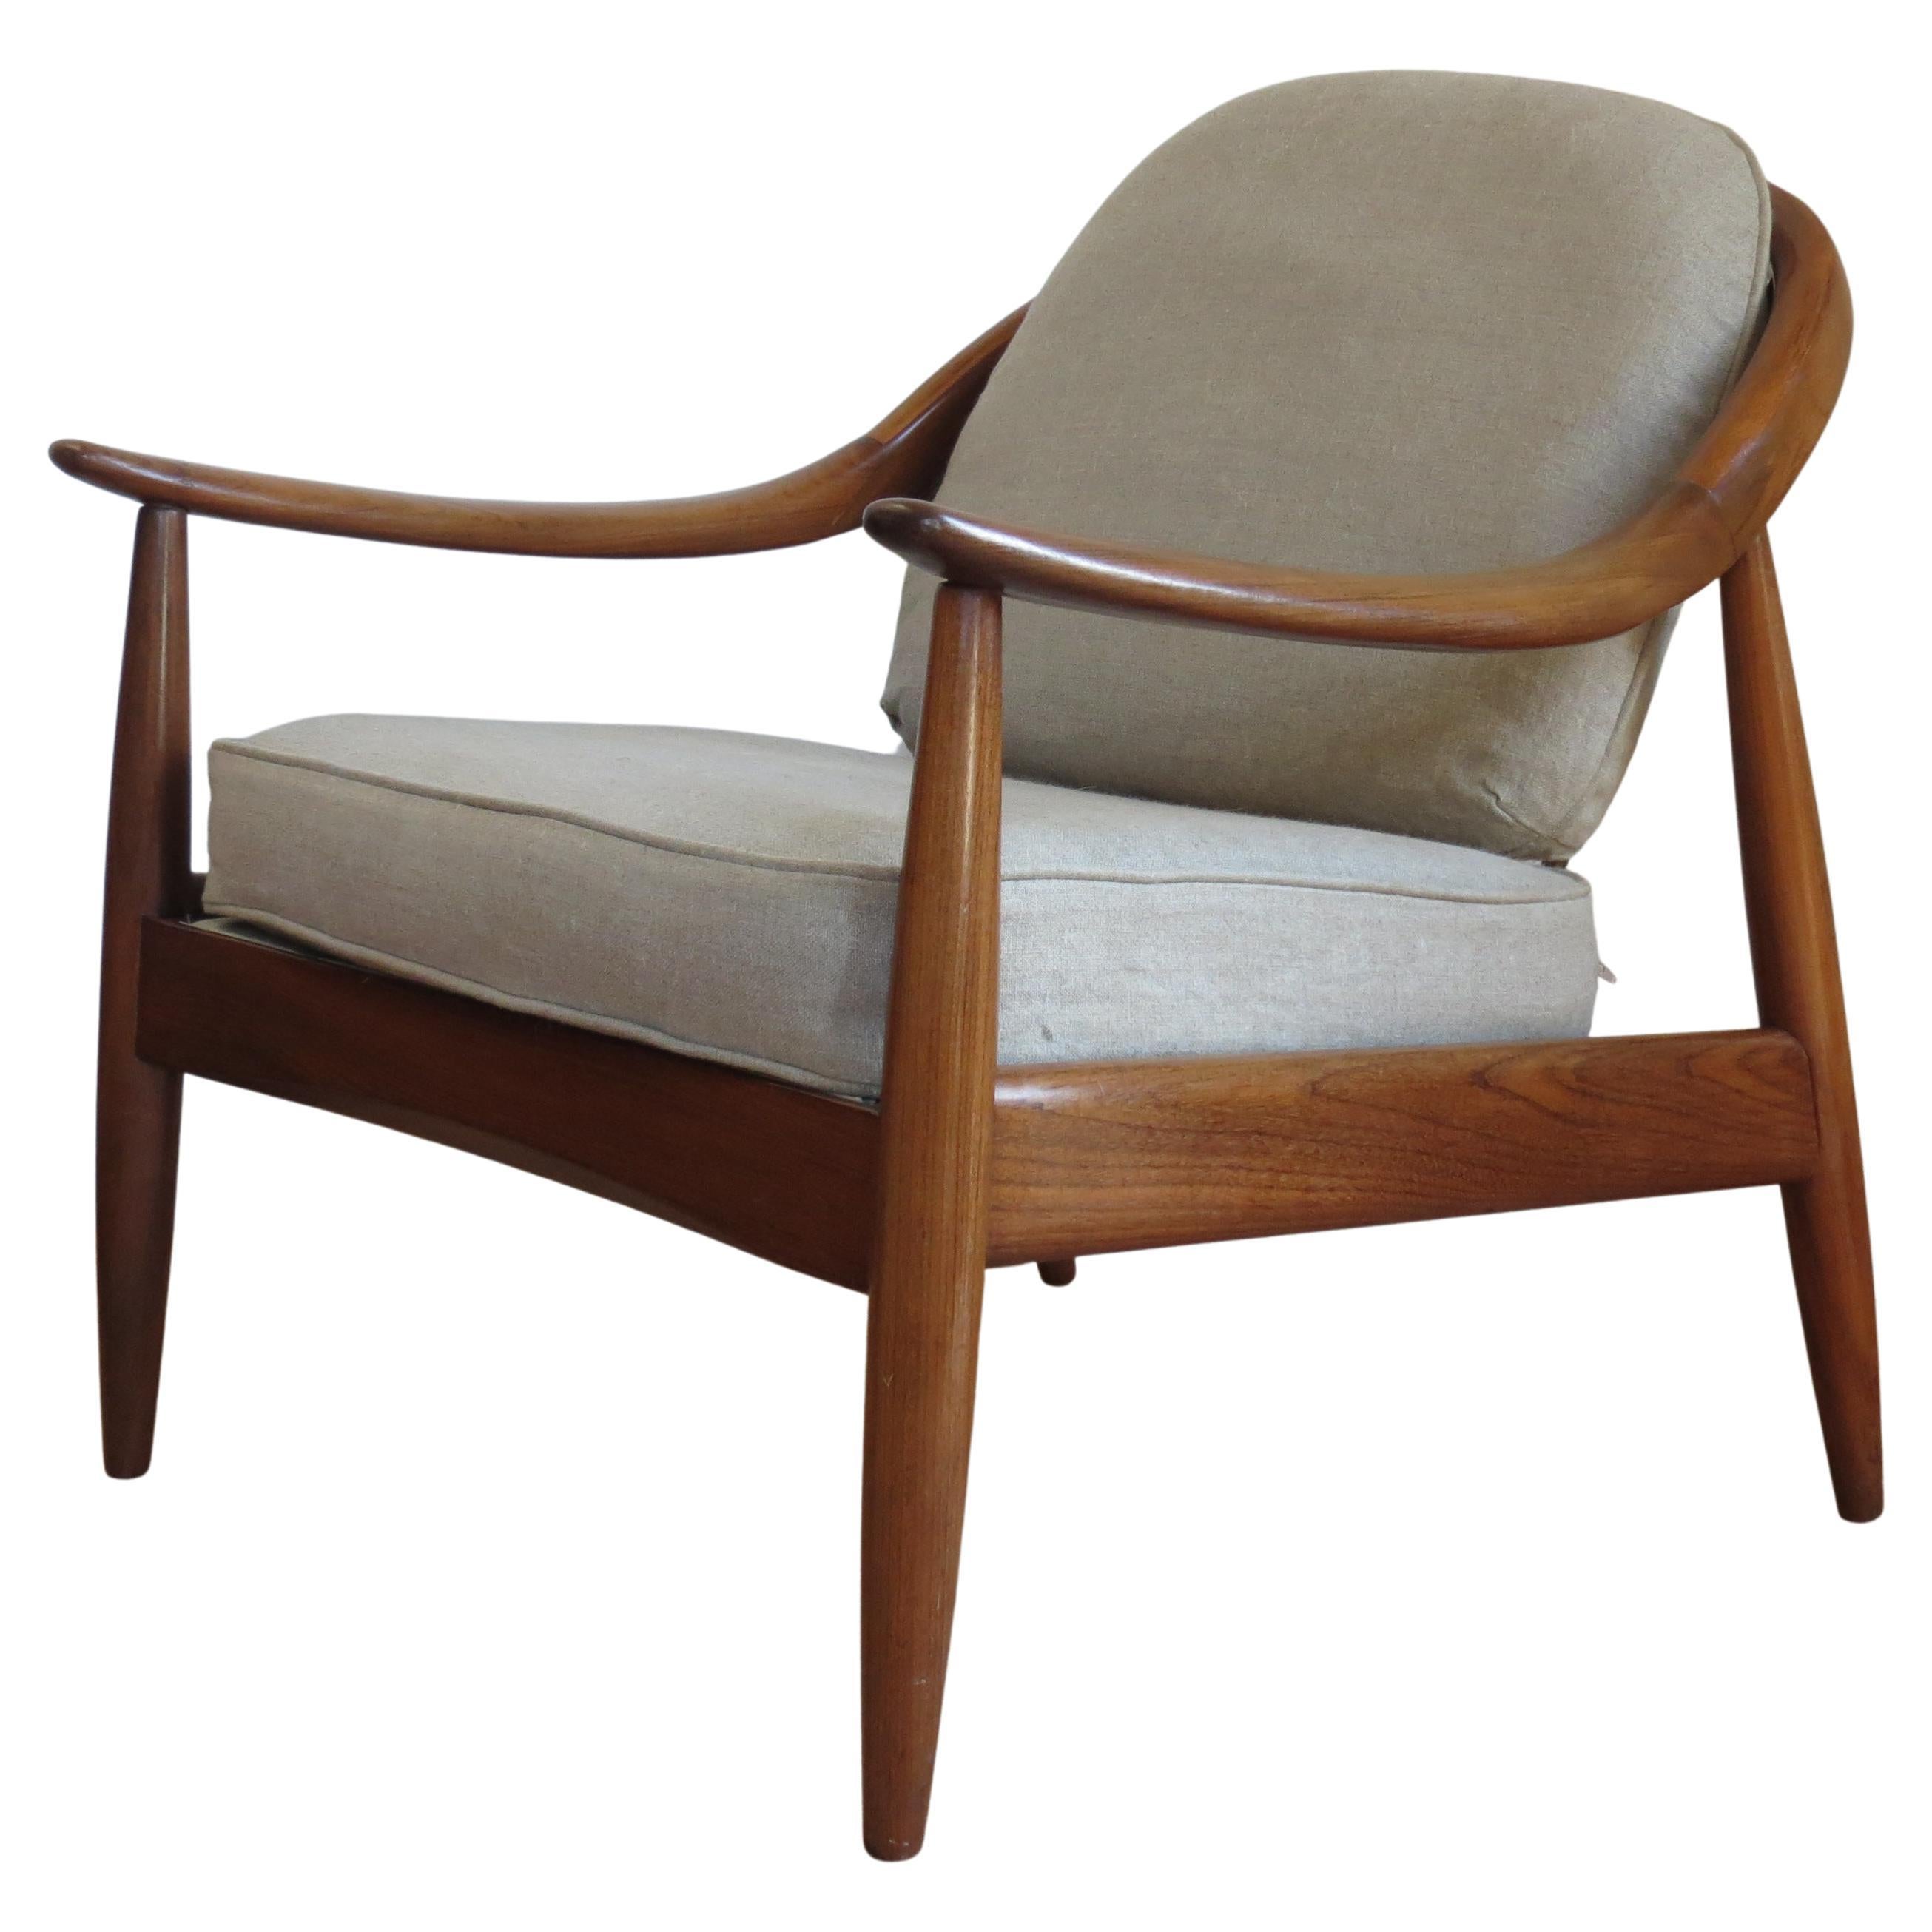 Afrormosia Midcentury Armchair by Greaves and Thomas 1960s B